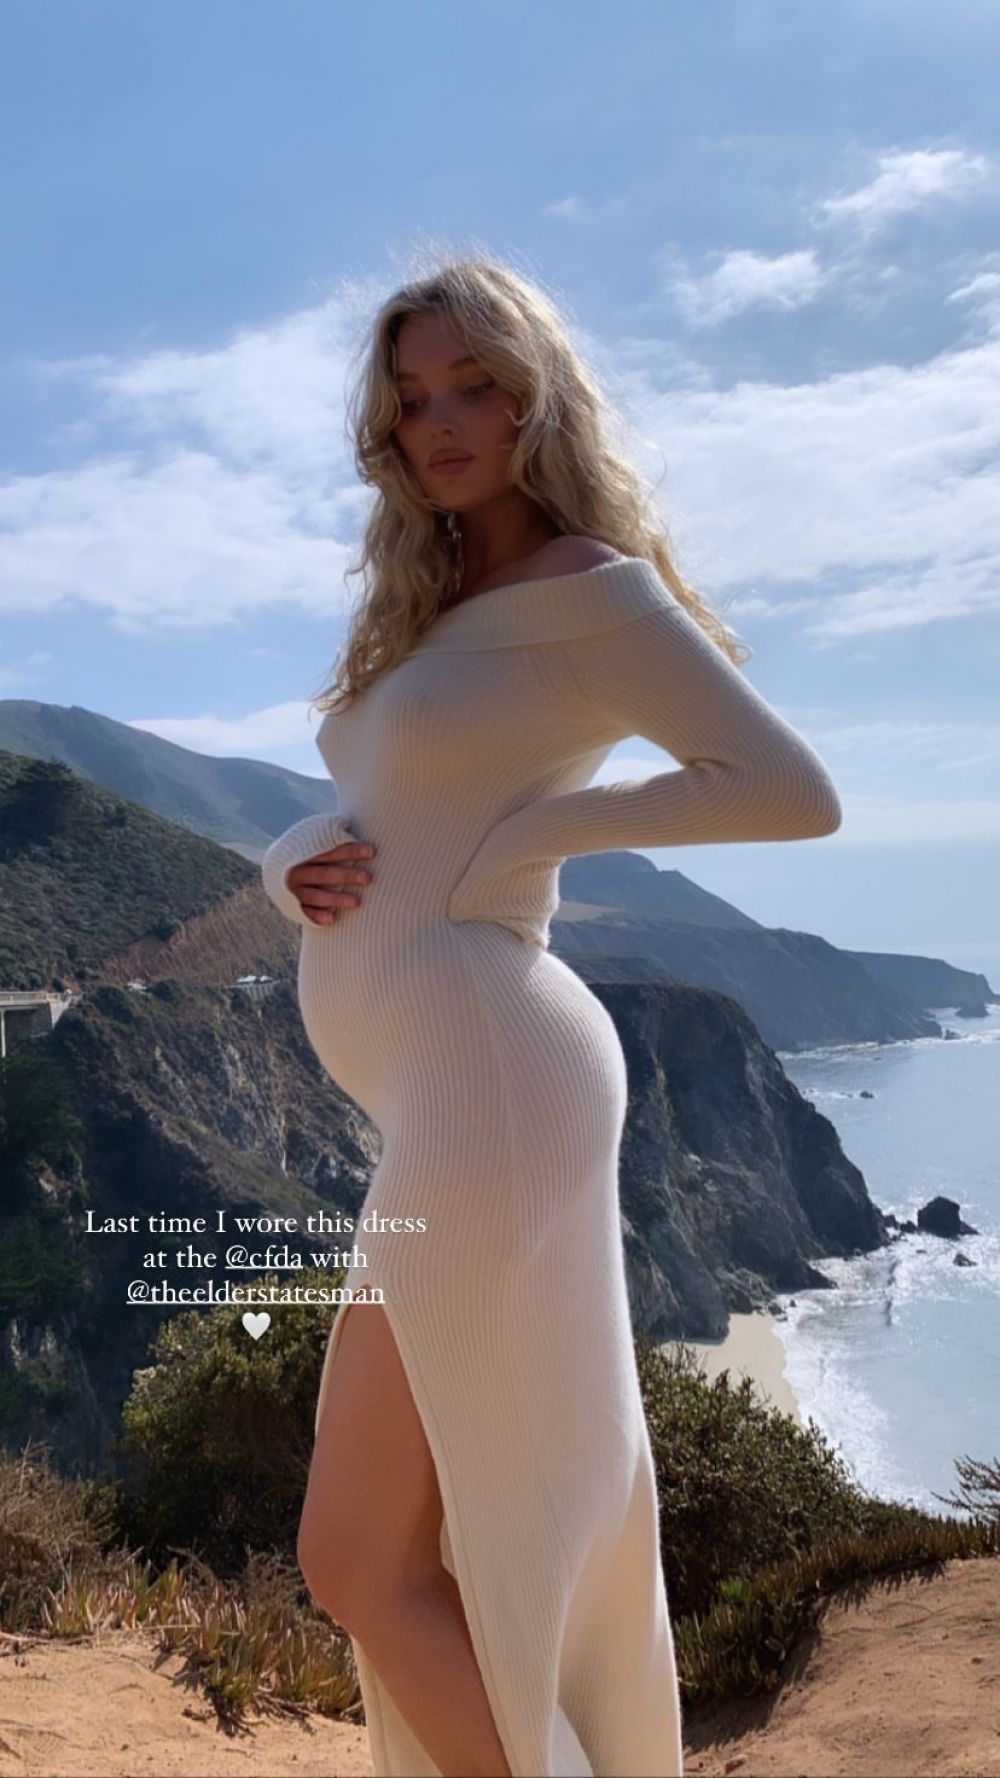 Pregnant Elsa Hosk Show Baby Bump in Beautiful Outfit - Instagram Photos 10/28/2020 2